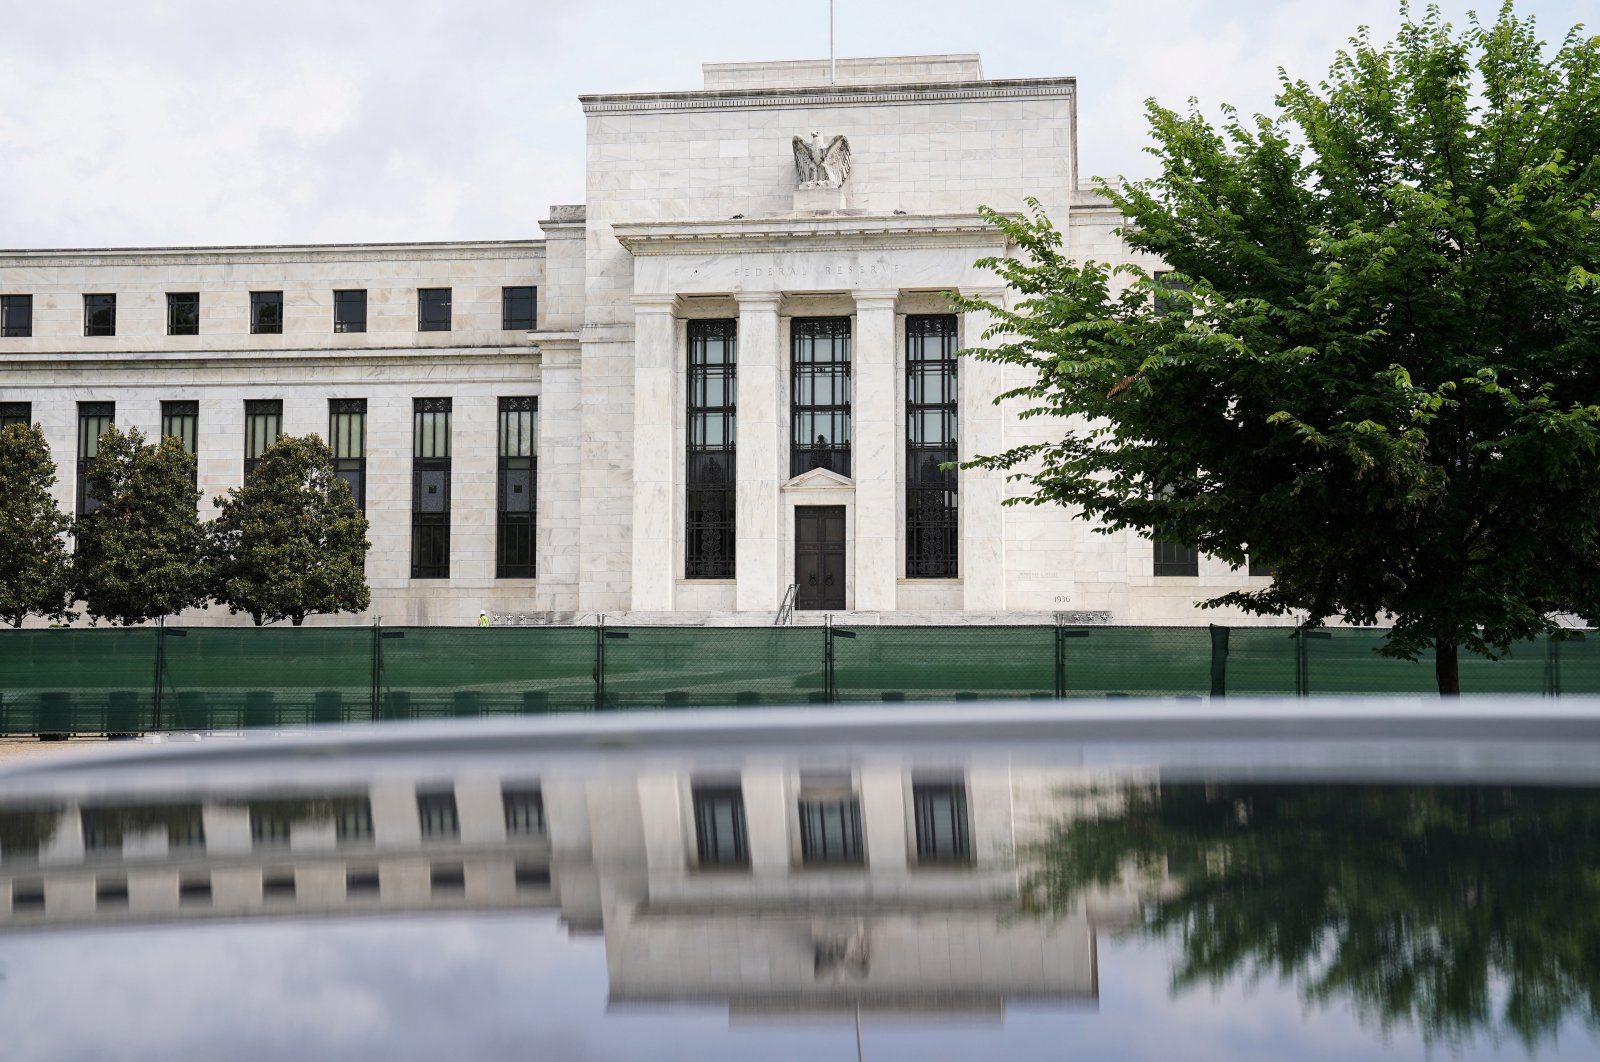 The exterior of the Marriner S. Eccles Federal Reserve Board Building is seen in Washington, D.C., U.S., June 14, 2022. (Reuters Photo)